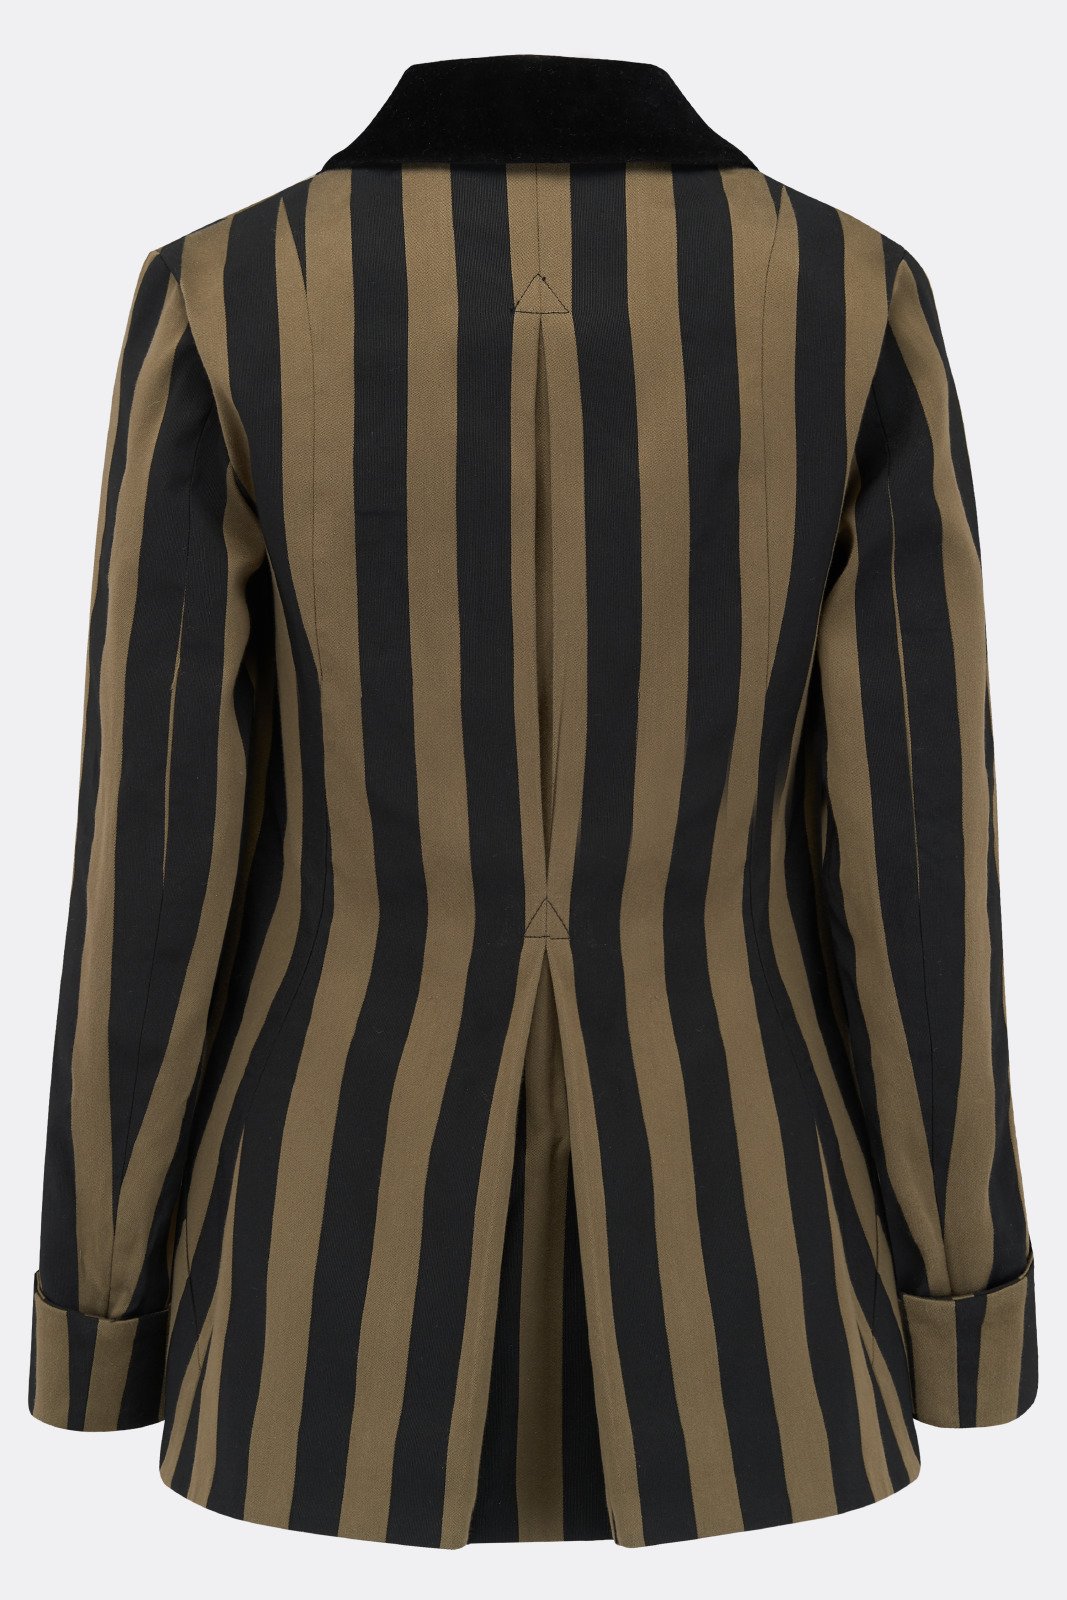 VESTA JACKET IN OLIVE AND BLACK STRIPE-womenswear-A Child Of The Jago